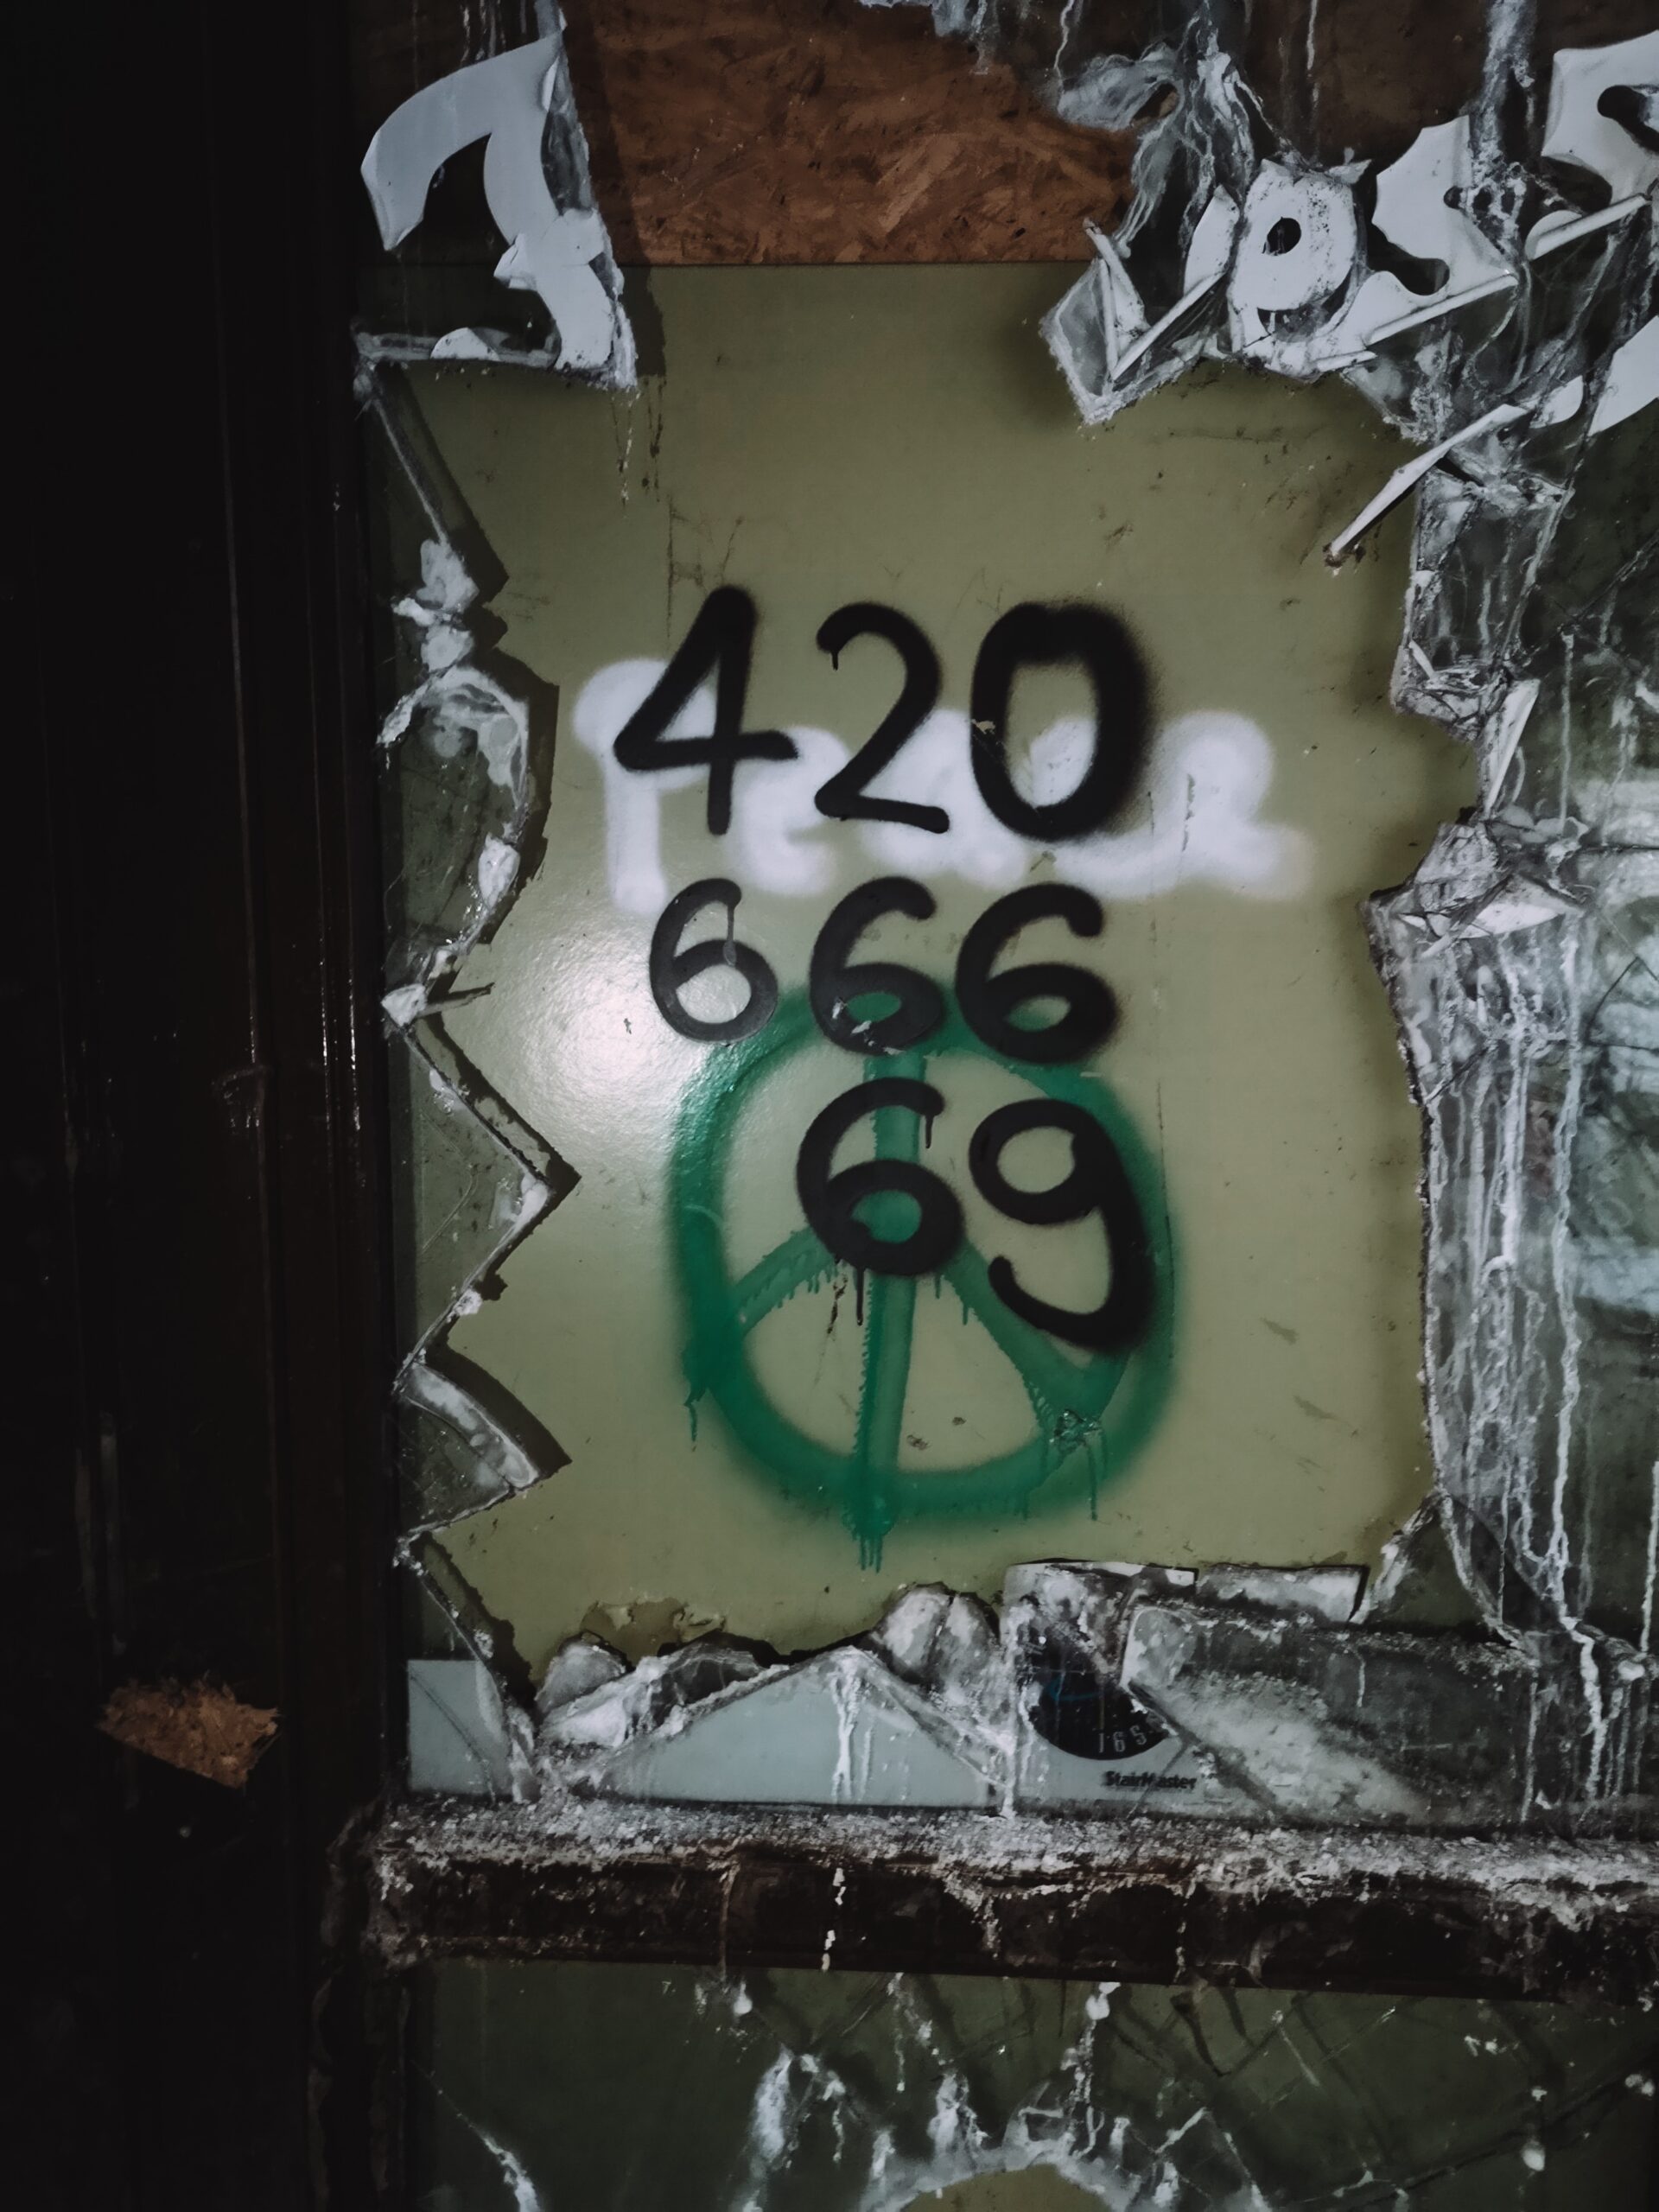 666 graffiti on a wall, representing the concept of numerology